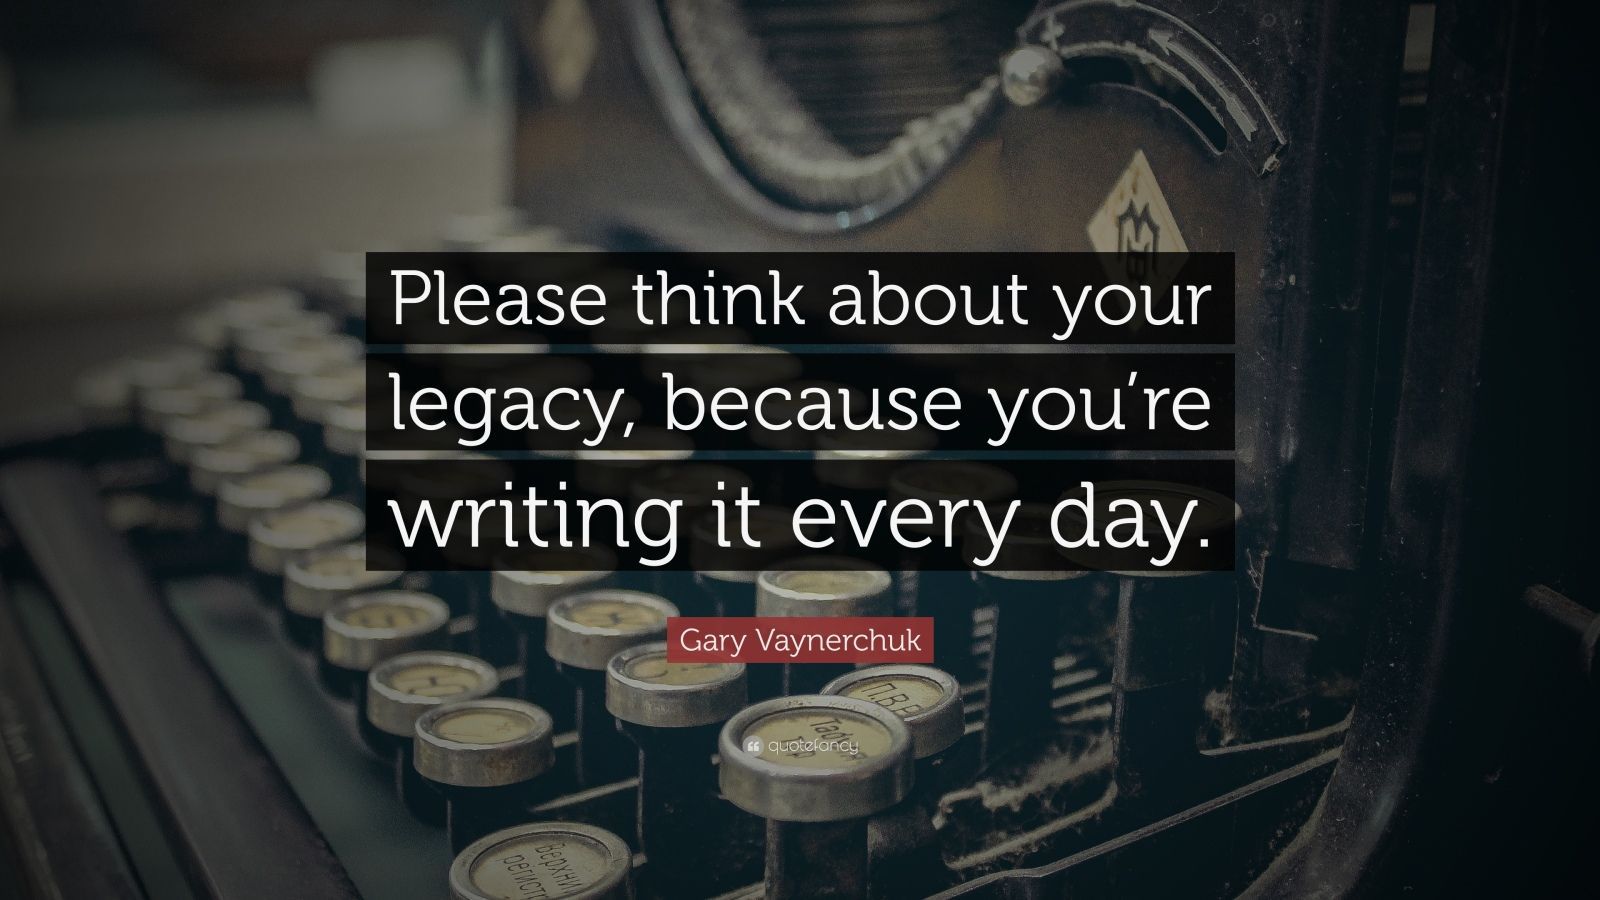 Gary Vaynerchuk Quote: “Please think about your legacy, because